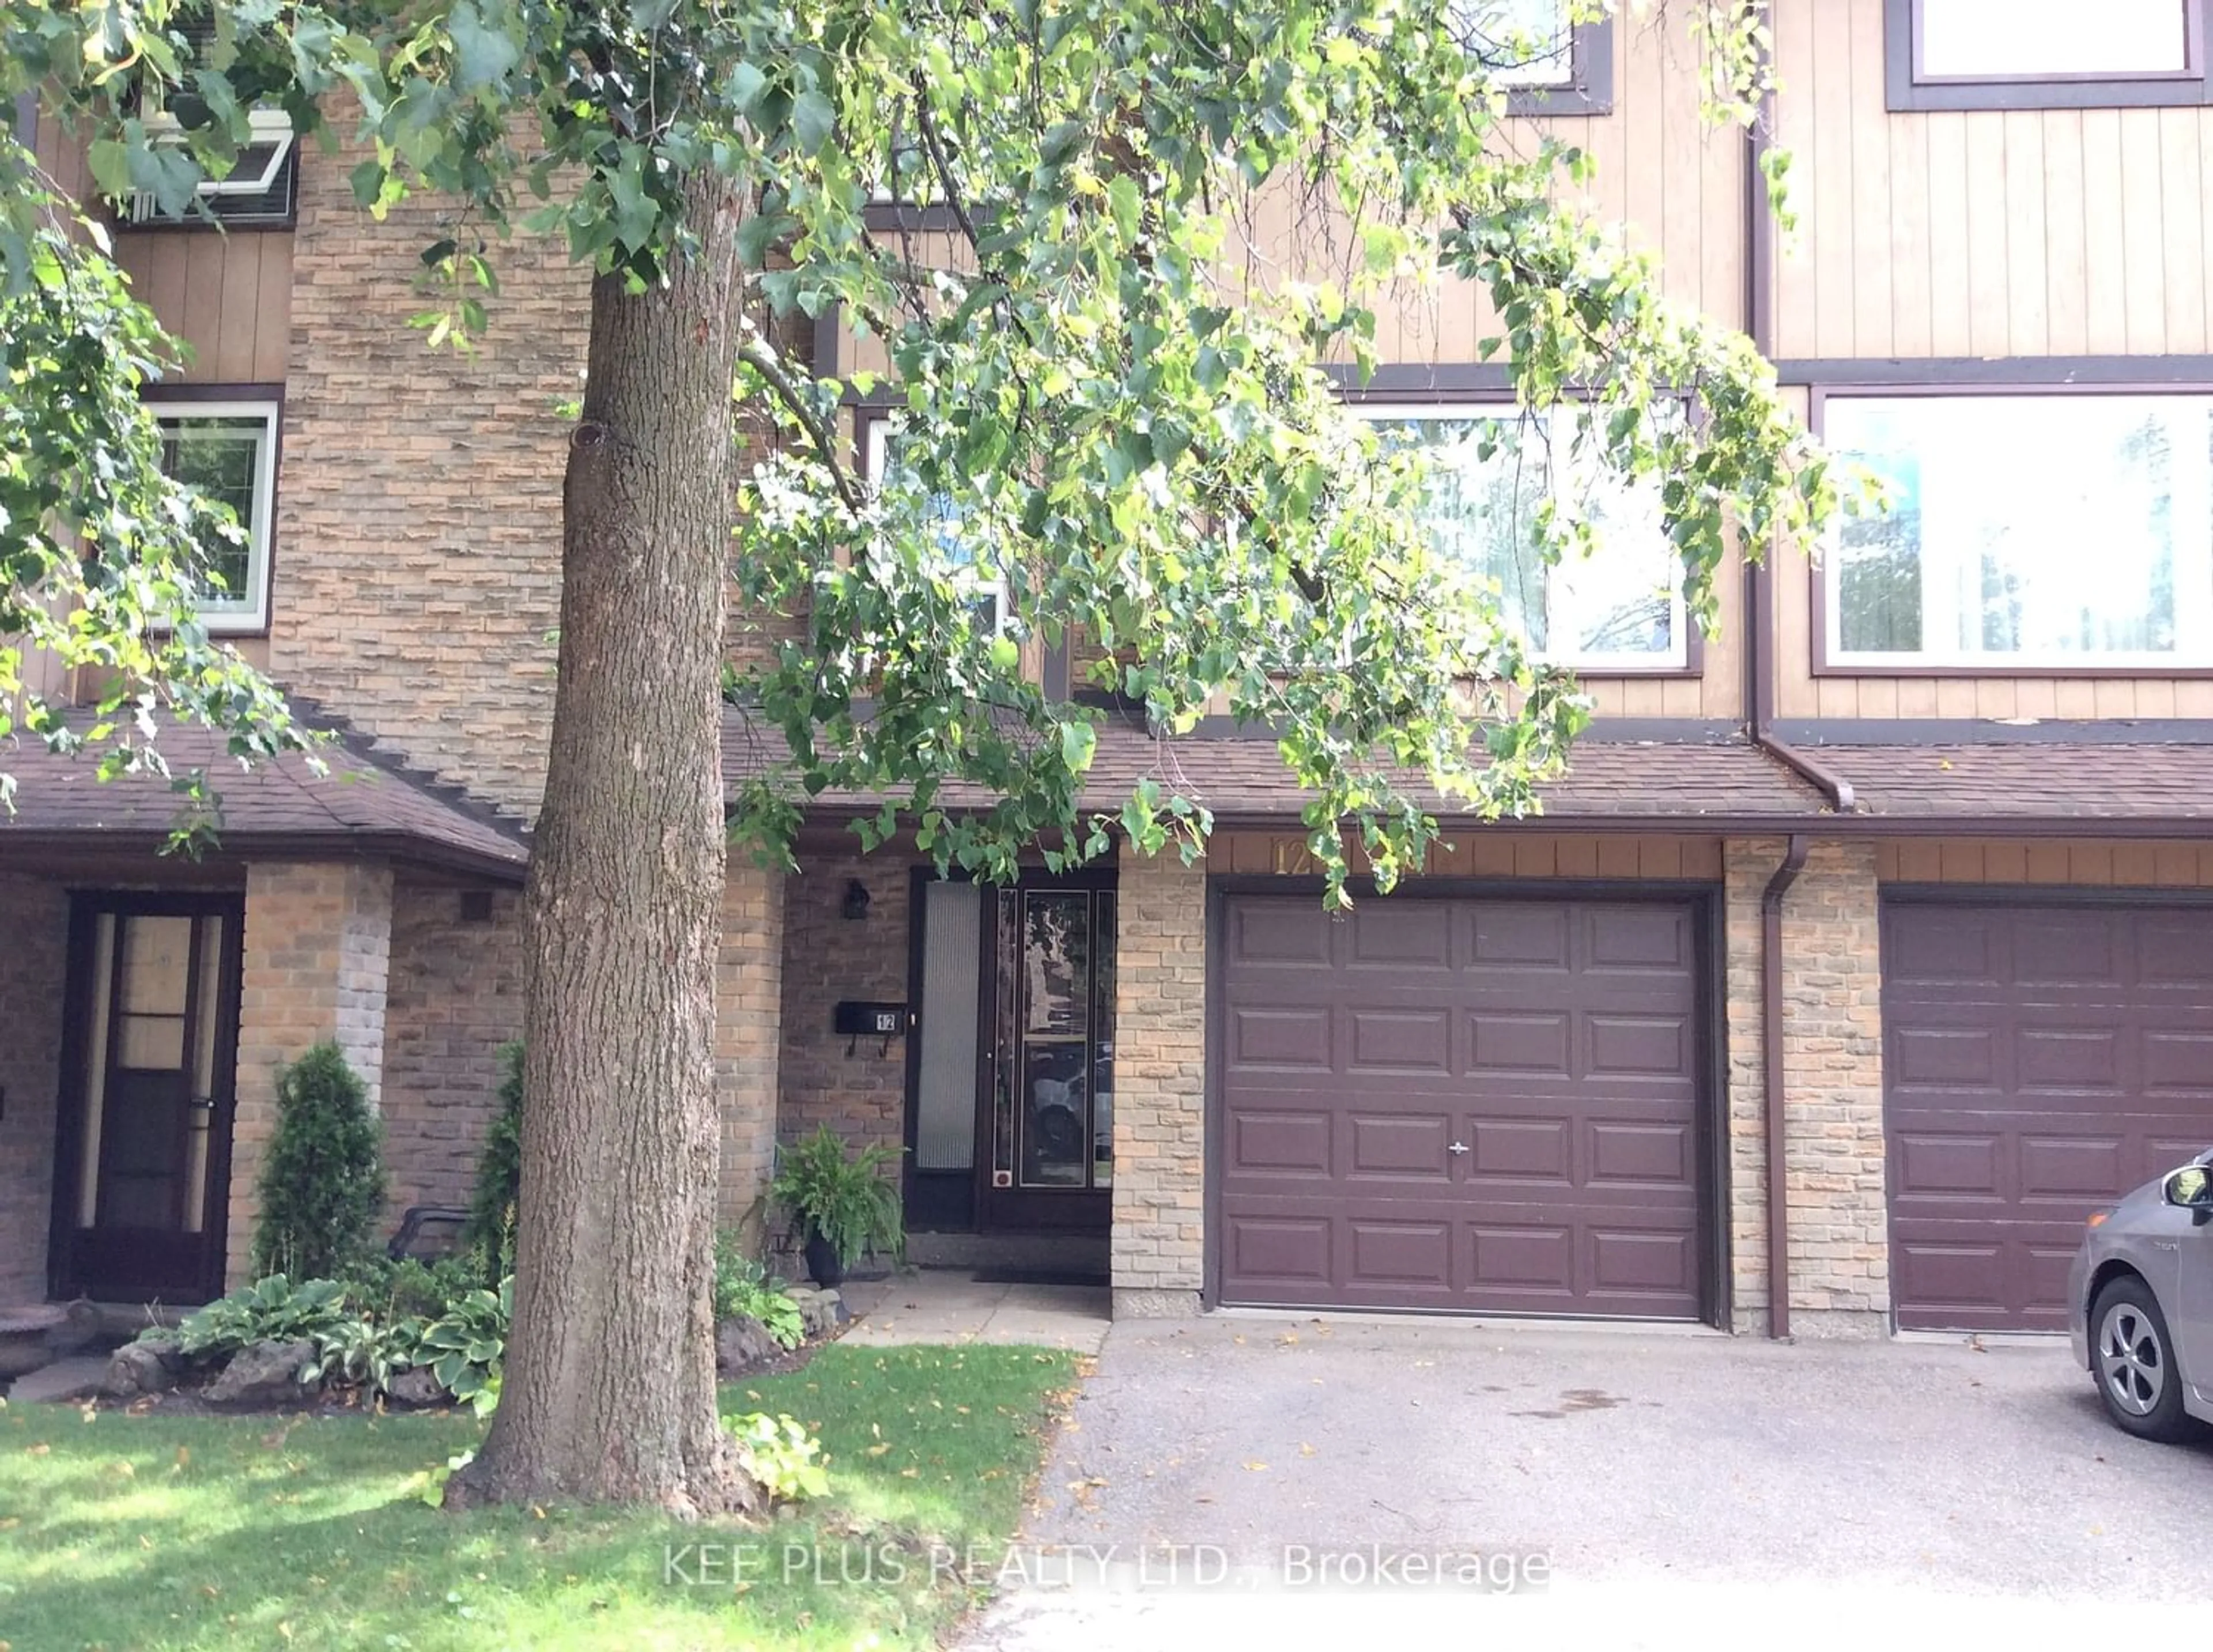 A pic from exterior of the house or condo for 2359 Birchmount Rd #12, Toronto Ontario M1T 3S7